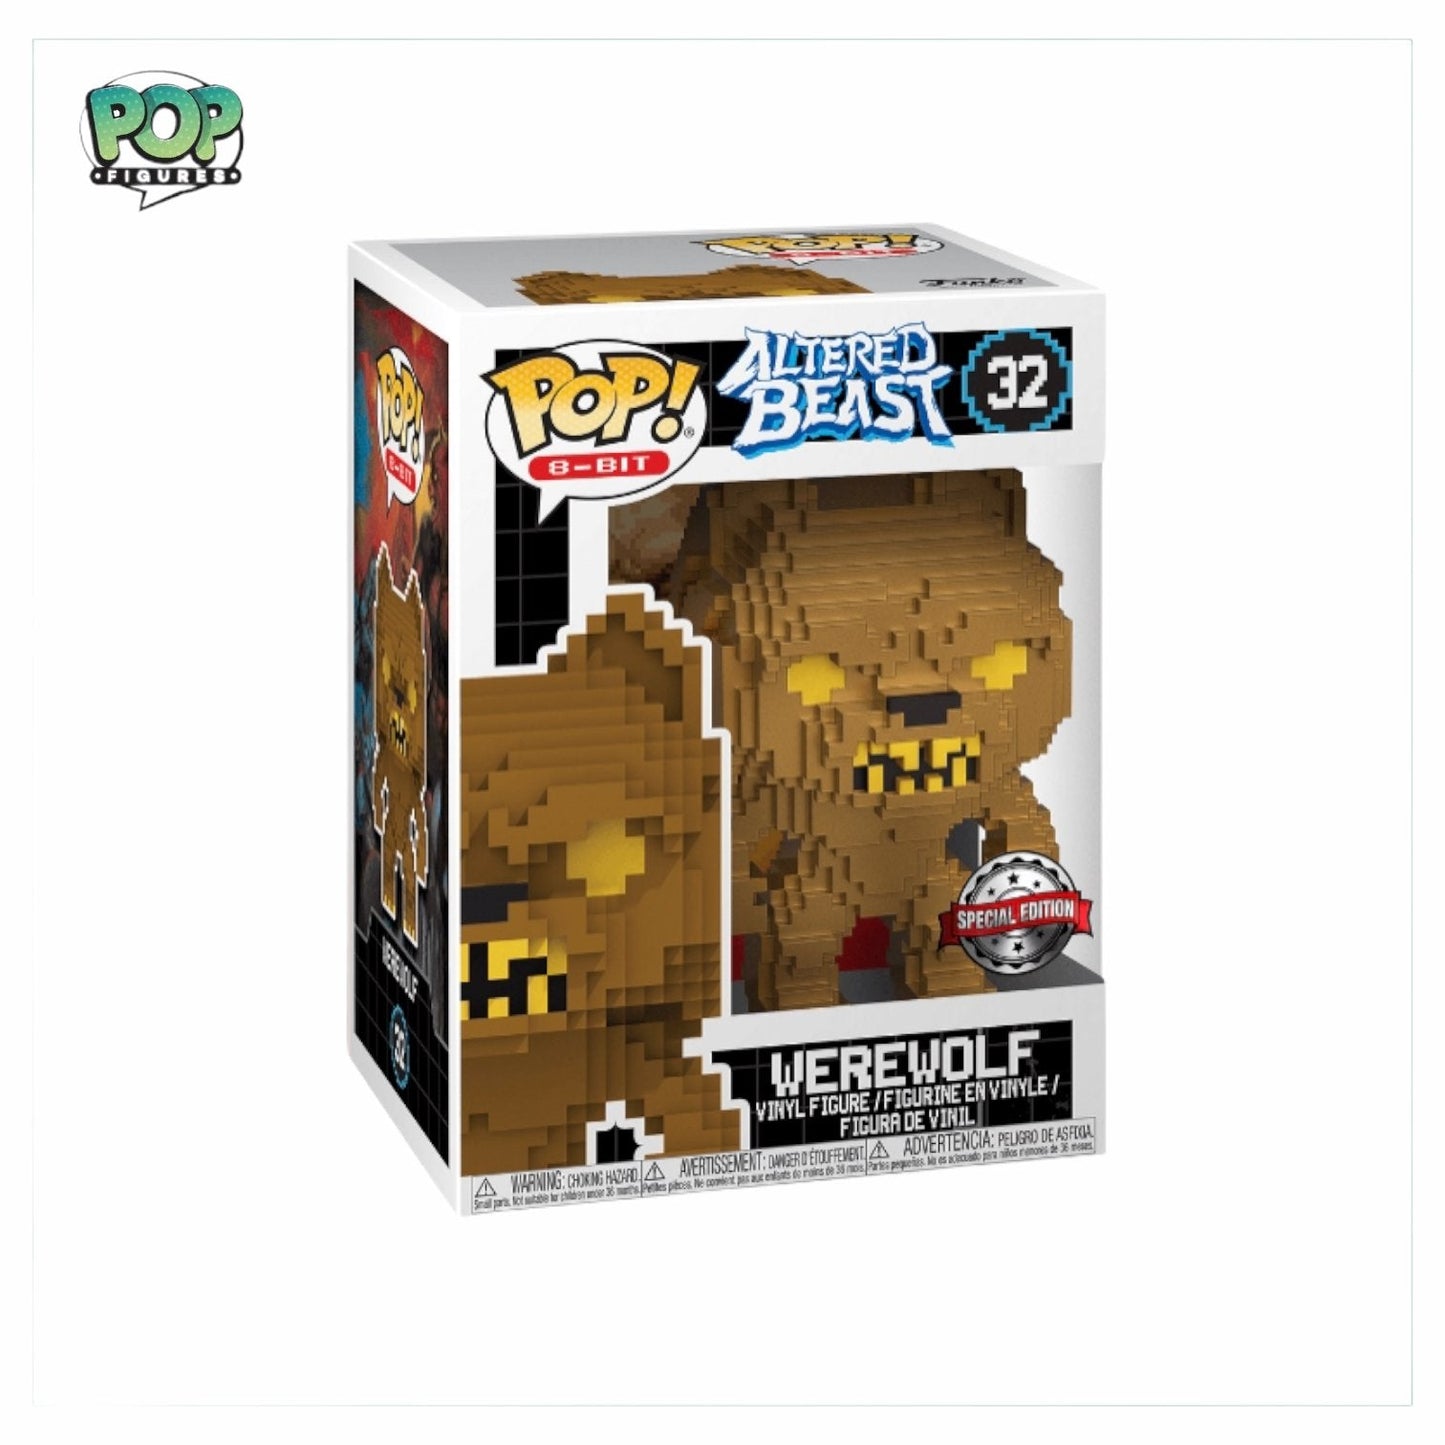 Werewolf #32 Funko Pop! 8-Bit, Altered Beast, Special Edition - Angry Cat